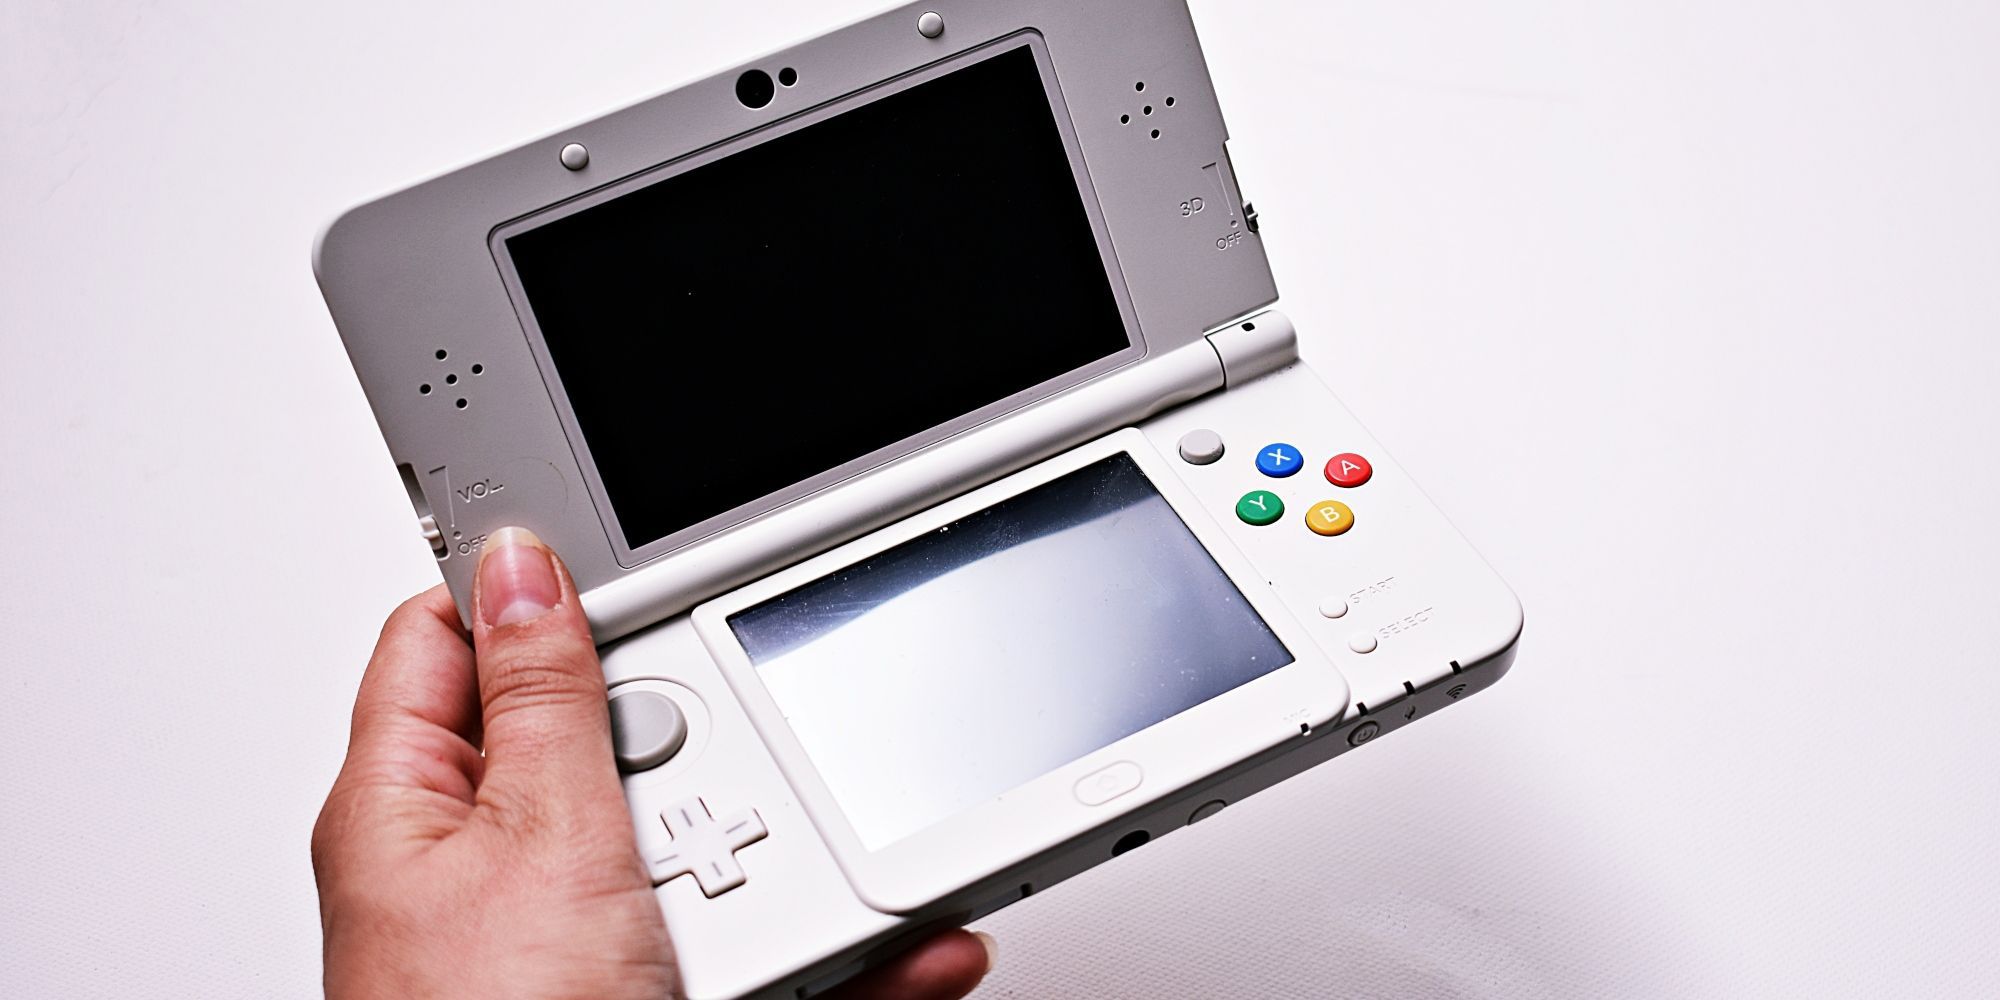 Hand holding up a white New Nintendo 3DS XL console.